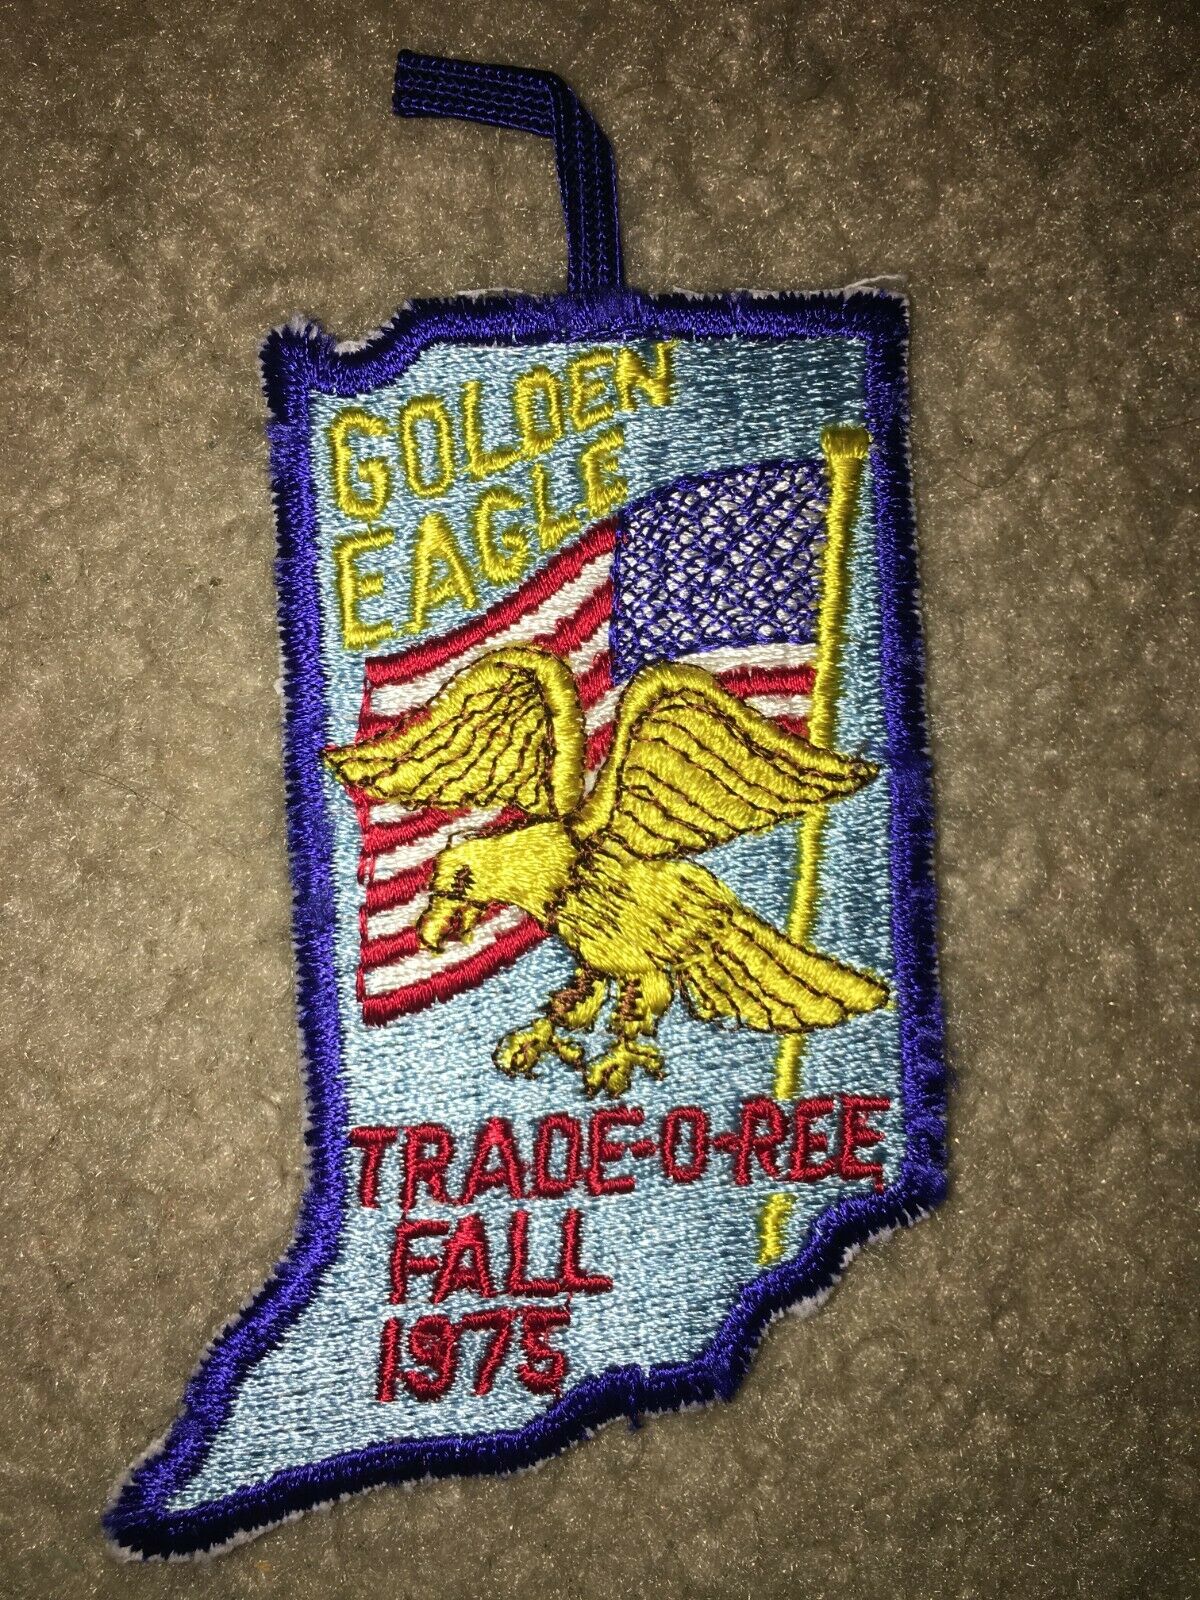 Boy Scout 1975 Golden Eagle Trade-o-ree Flag State Council Indiana Shape Patch